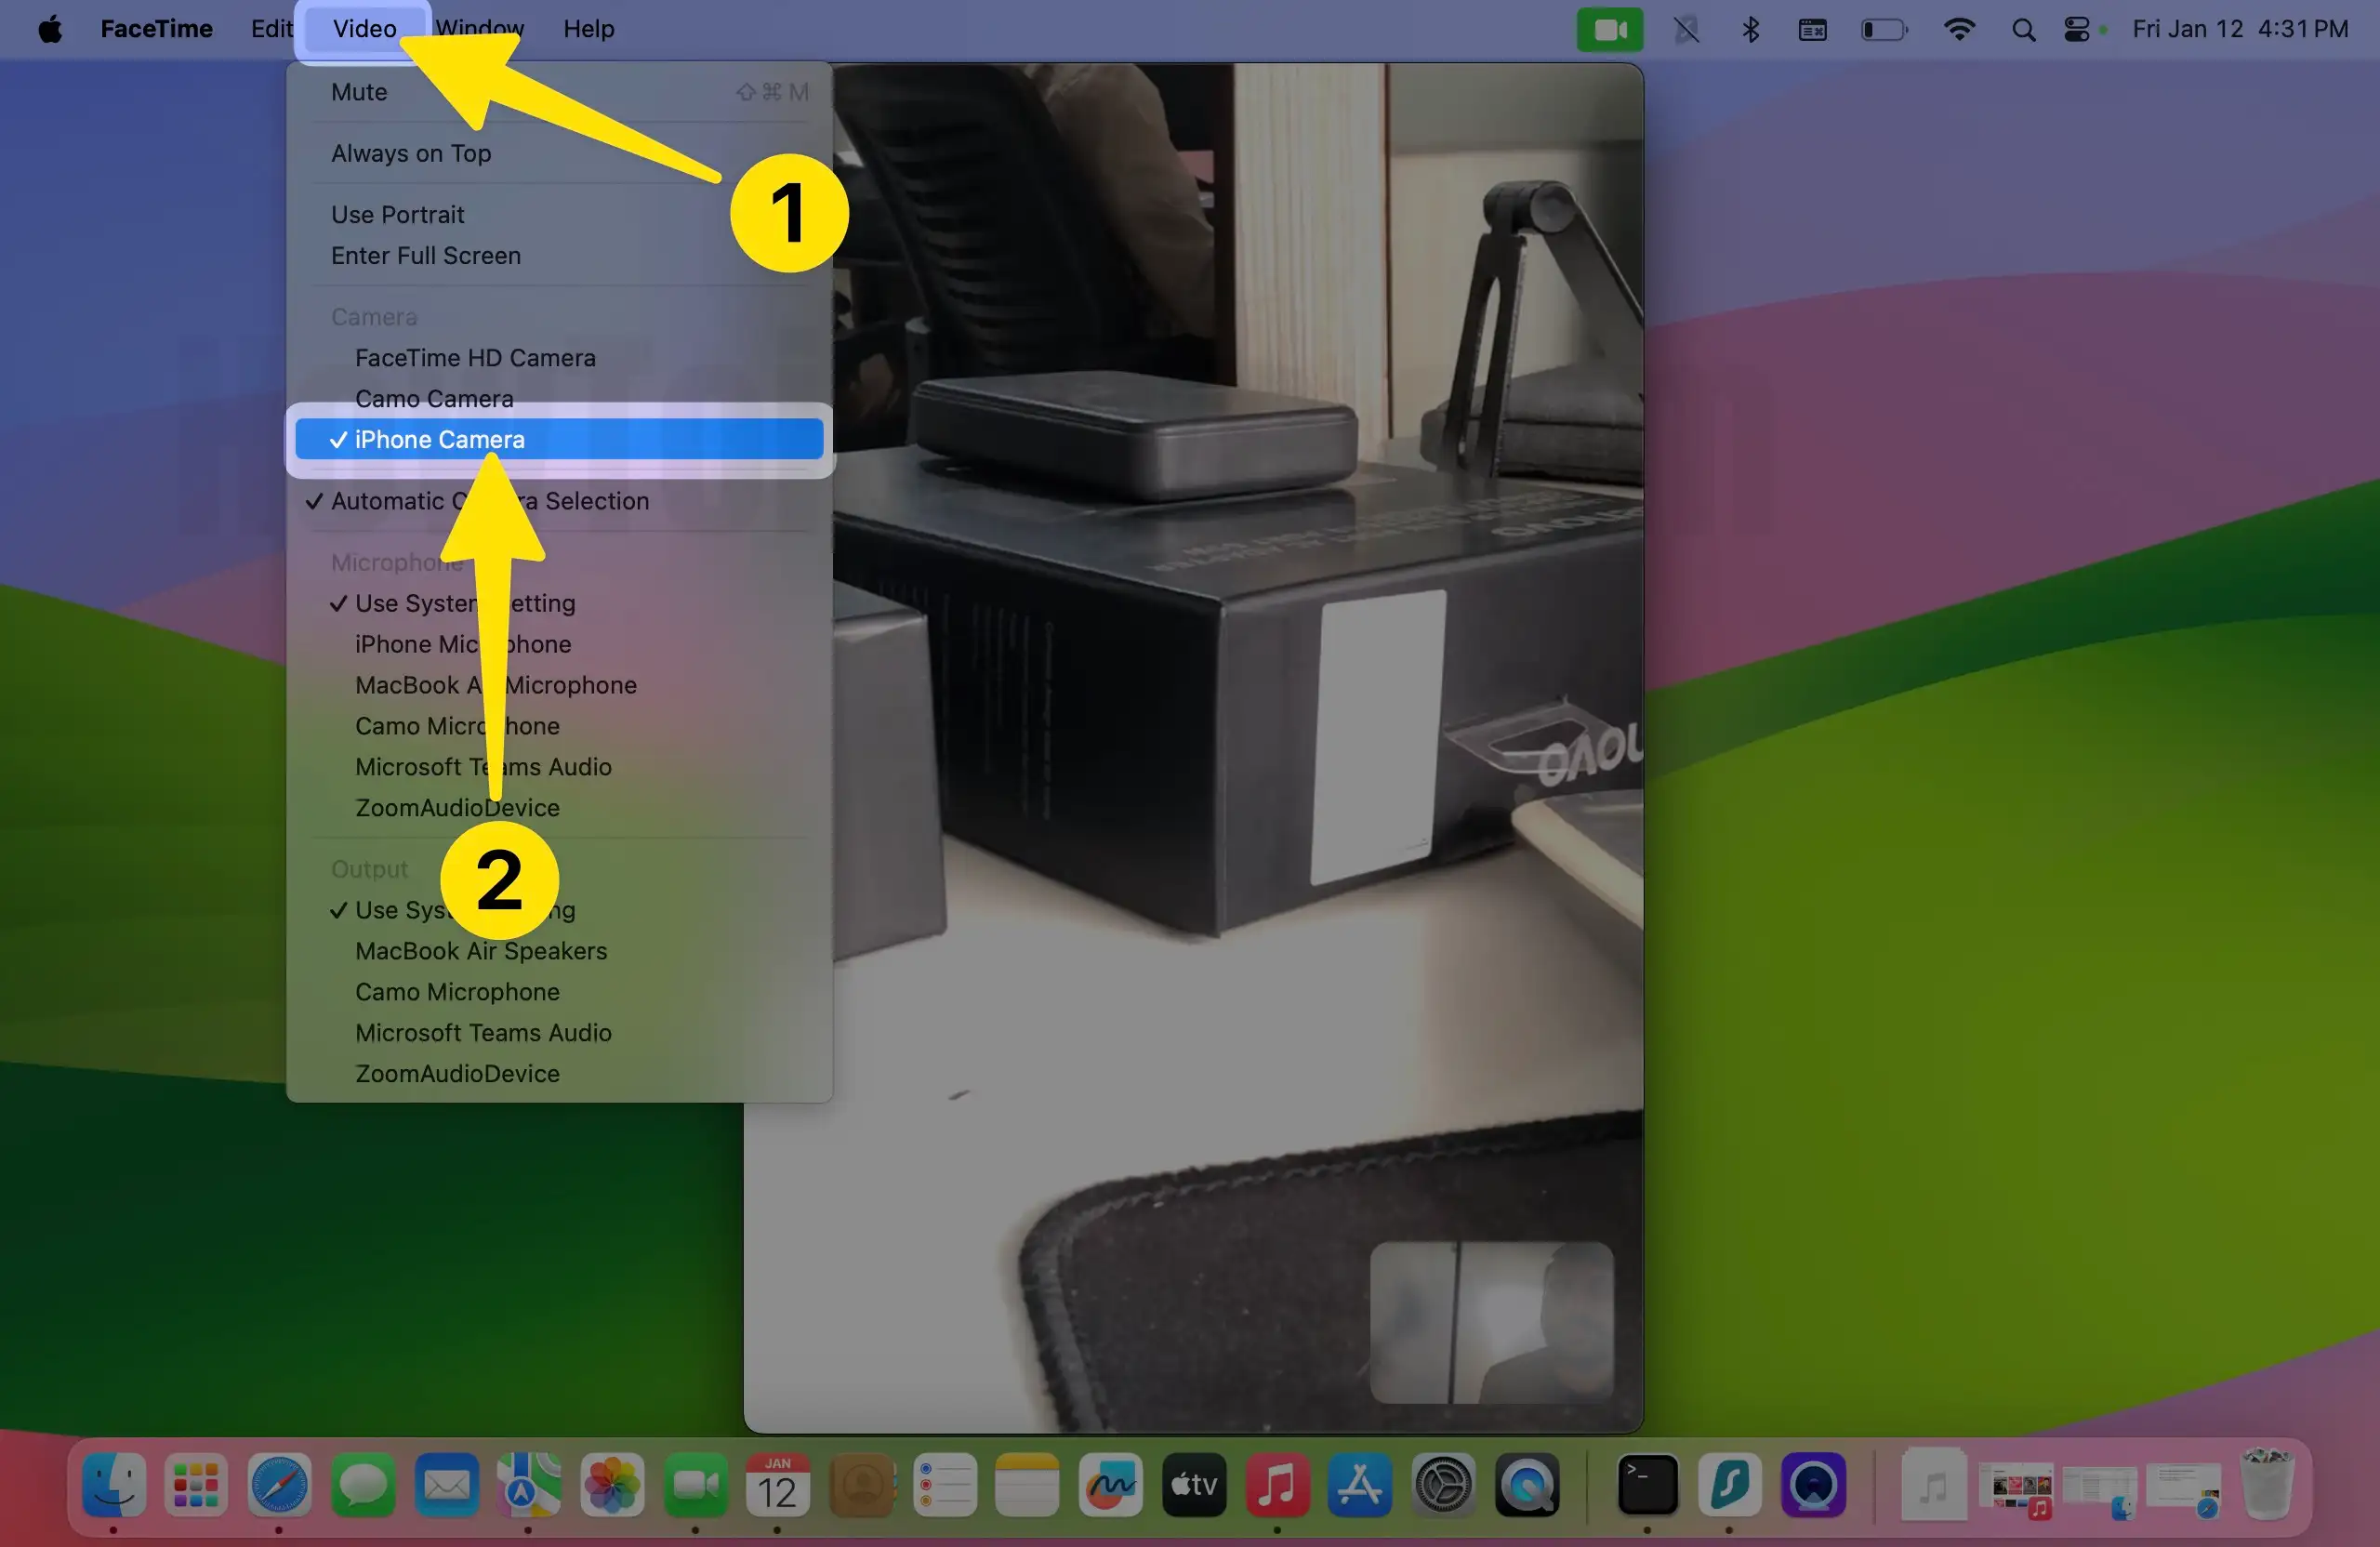 Open Facetime click on video at menubar select iPhone camera on mac